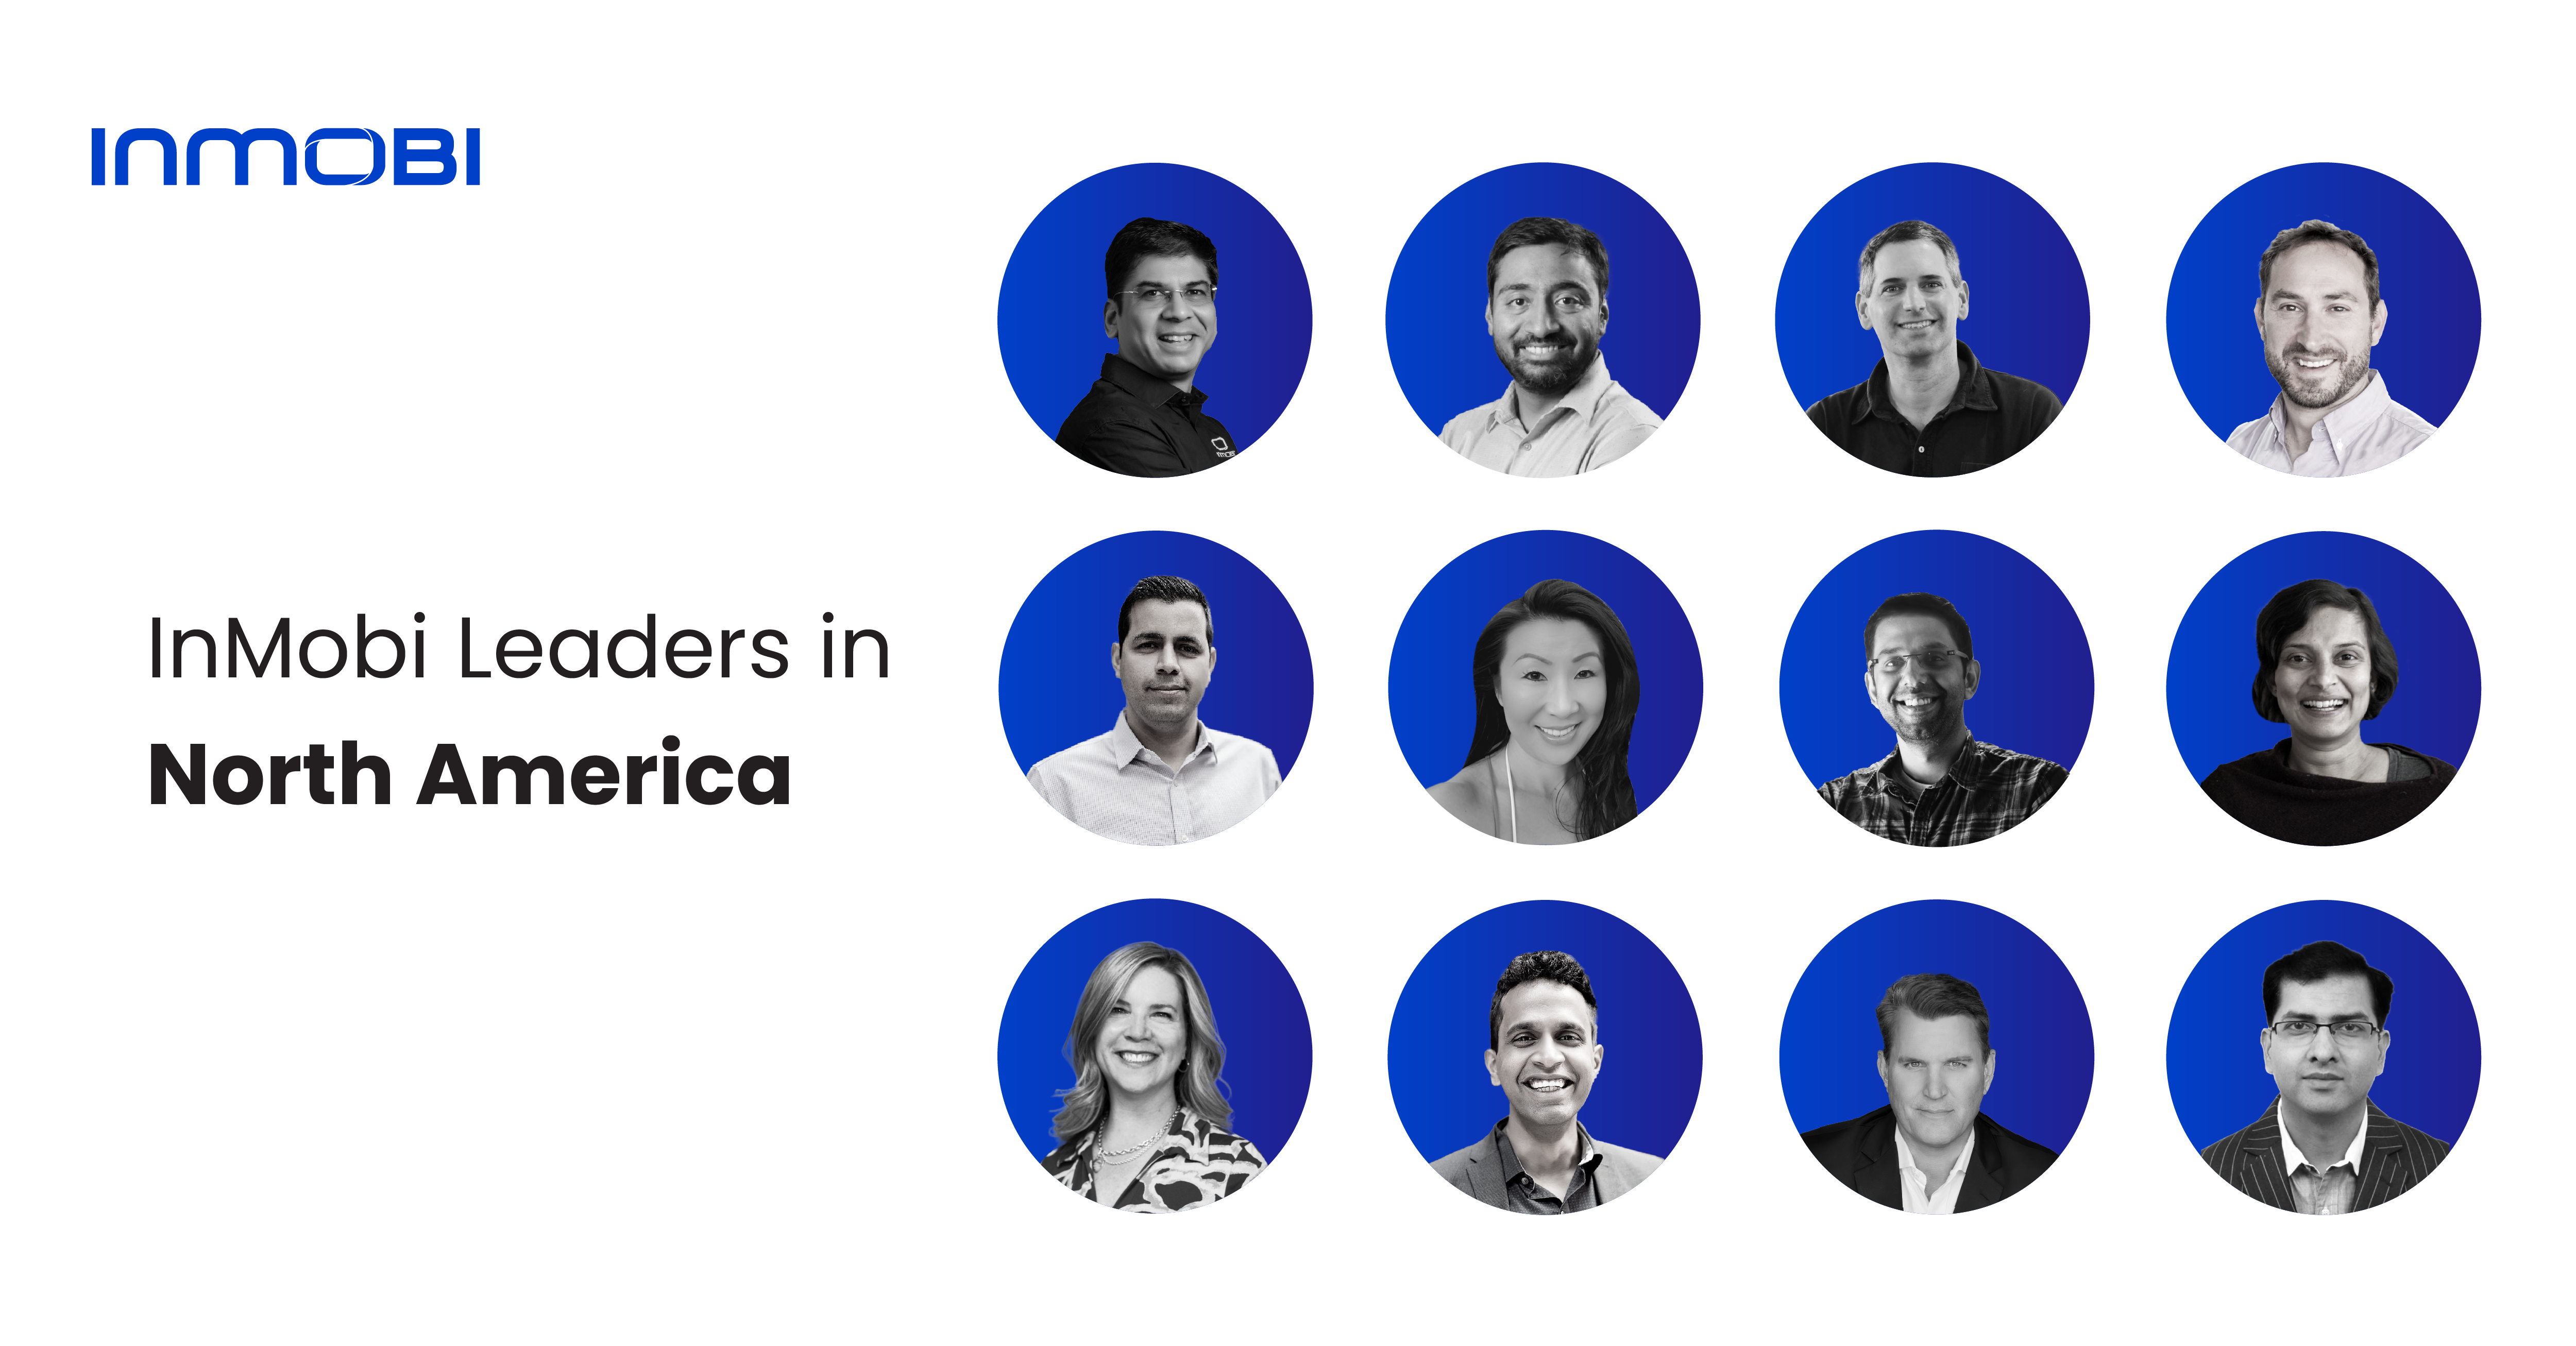 Get To Know InMobi's Leaders in North America